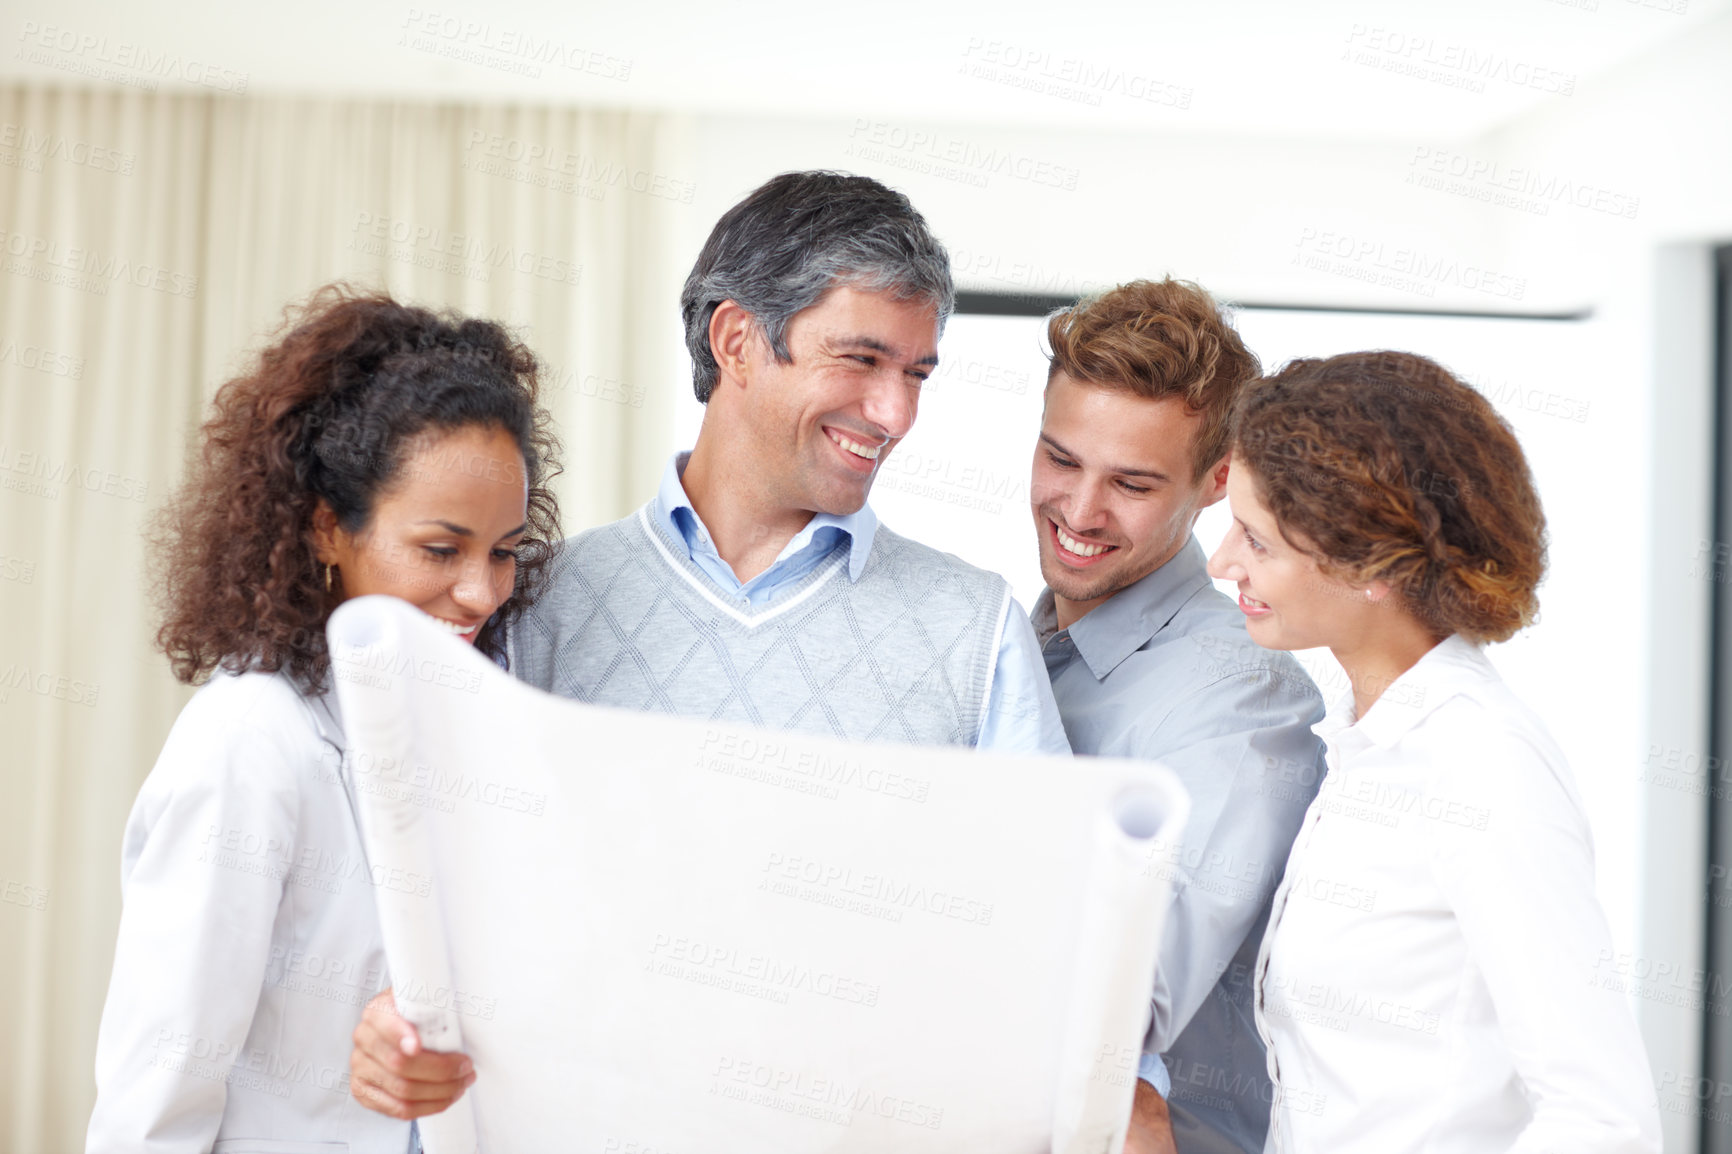 Buy stock photo Shot of a group of four architects looking over blueprints together